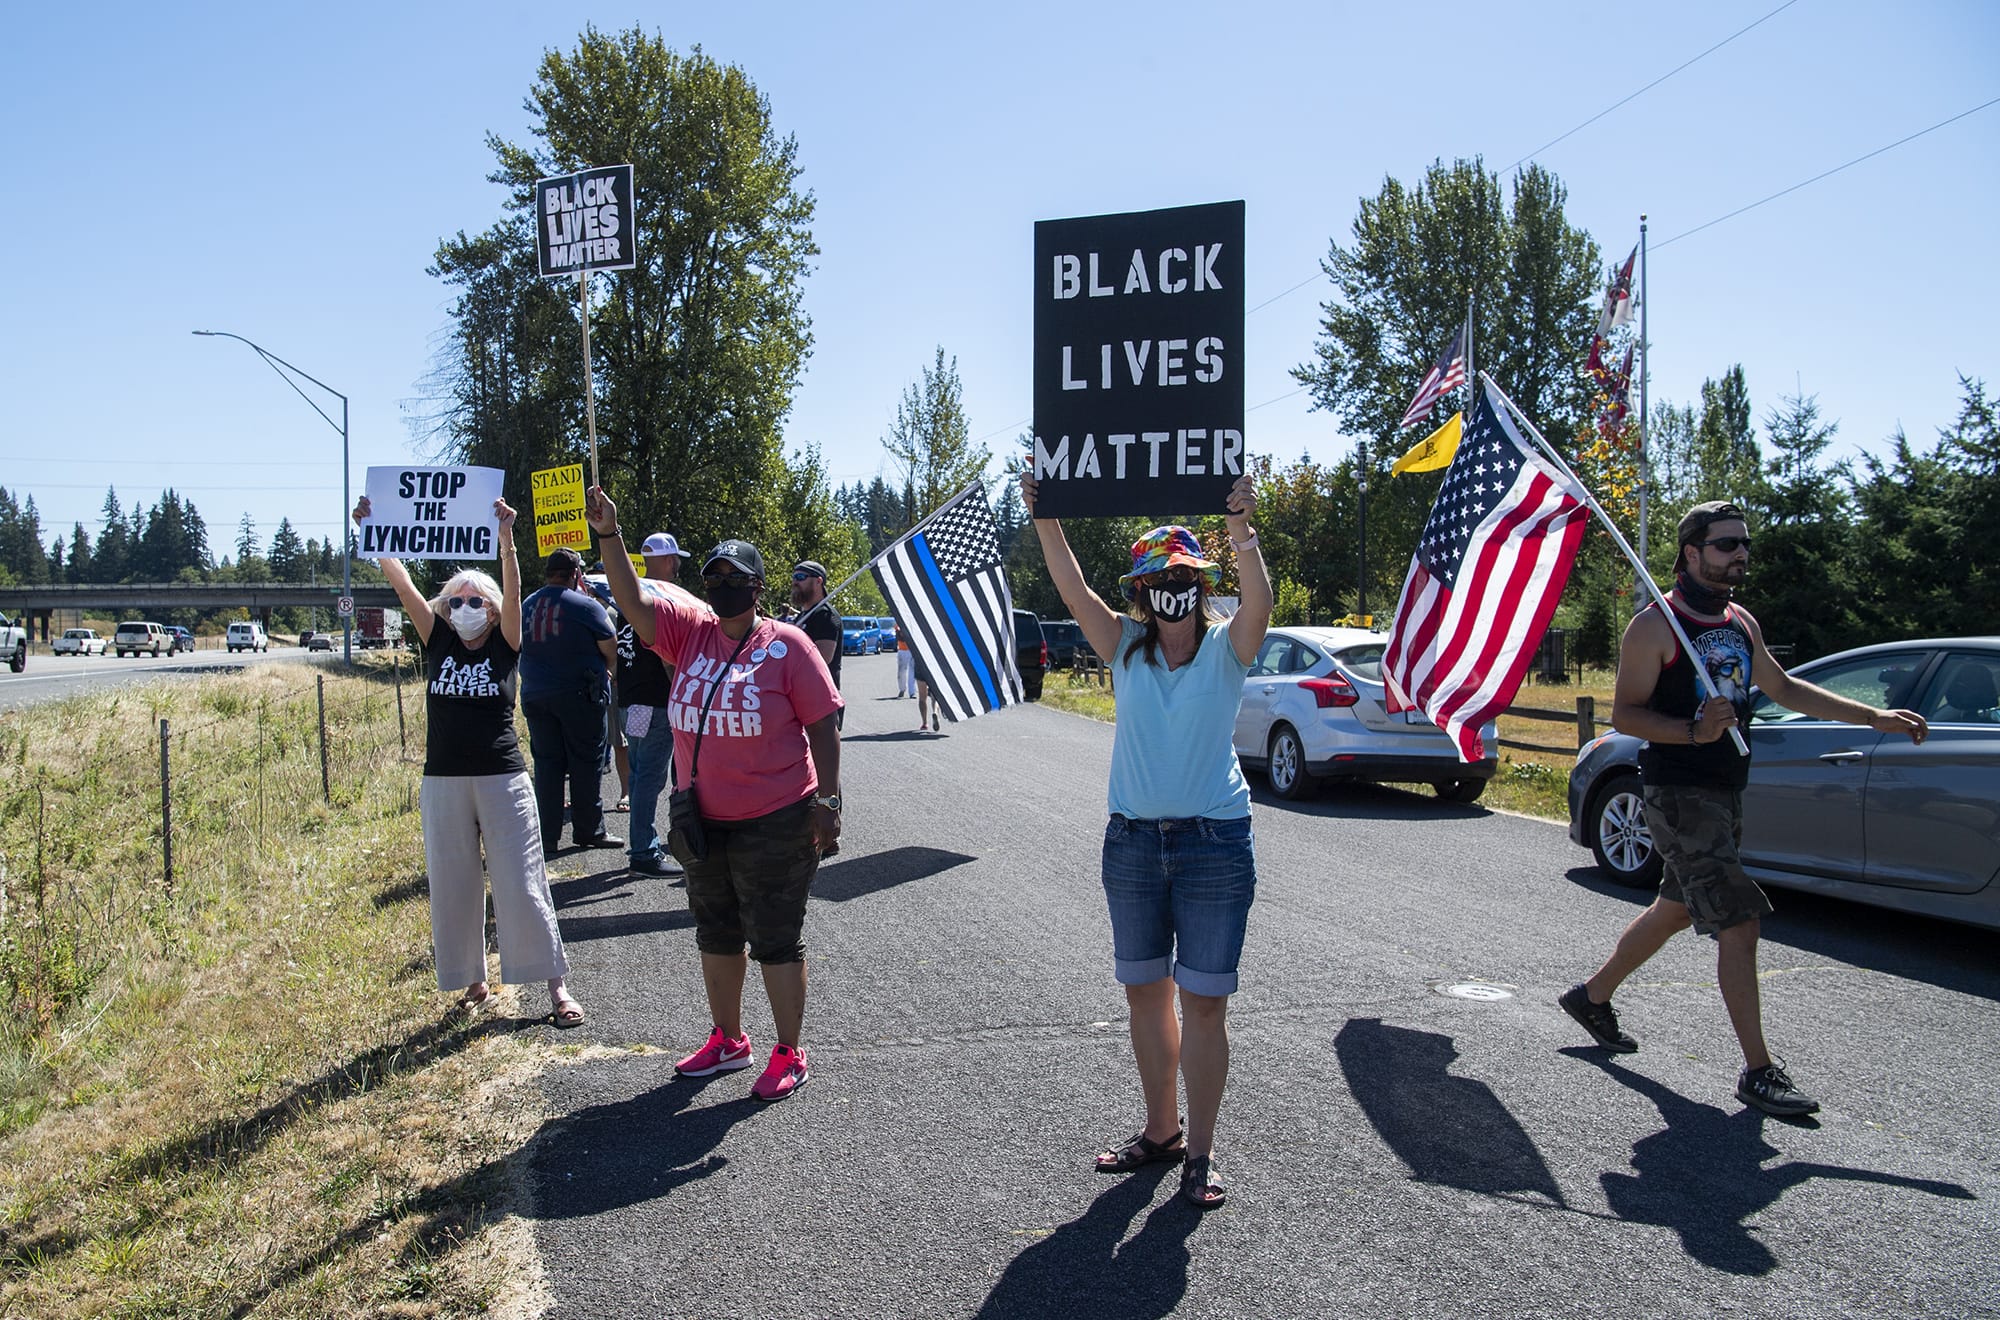 Nancy Shultz, from left, Oletha Wade-Matthews, and Julia Berreth, all of Vancouver, stand with a crowd to protests a Confederate monument and support the Black Lives Matter movement at Jefferson Davis Park near Ridgefield on August 28, 2020. A group of counter protesters, including Josh Vangelder of Battle Ground, right, were also present, waving confederate flags and American flags.